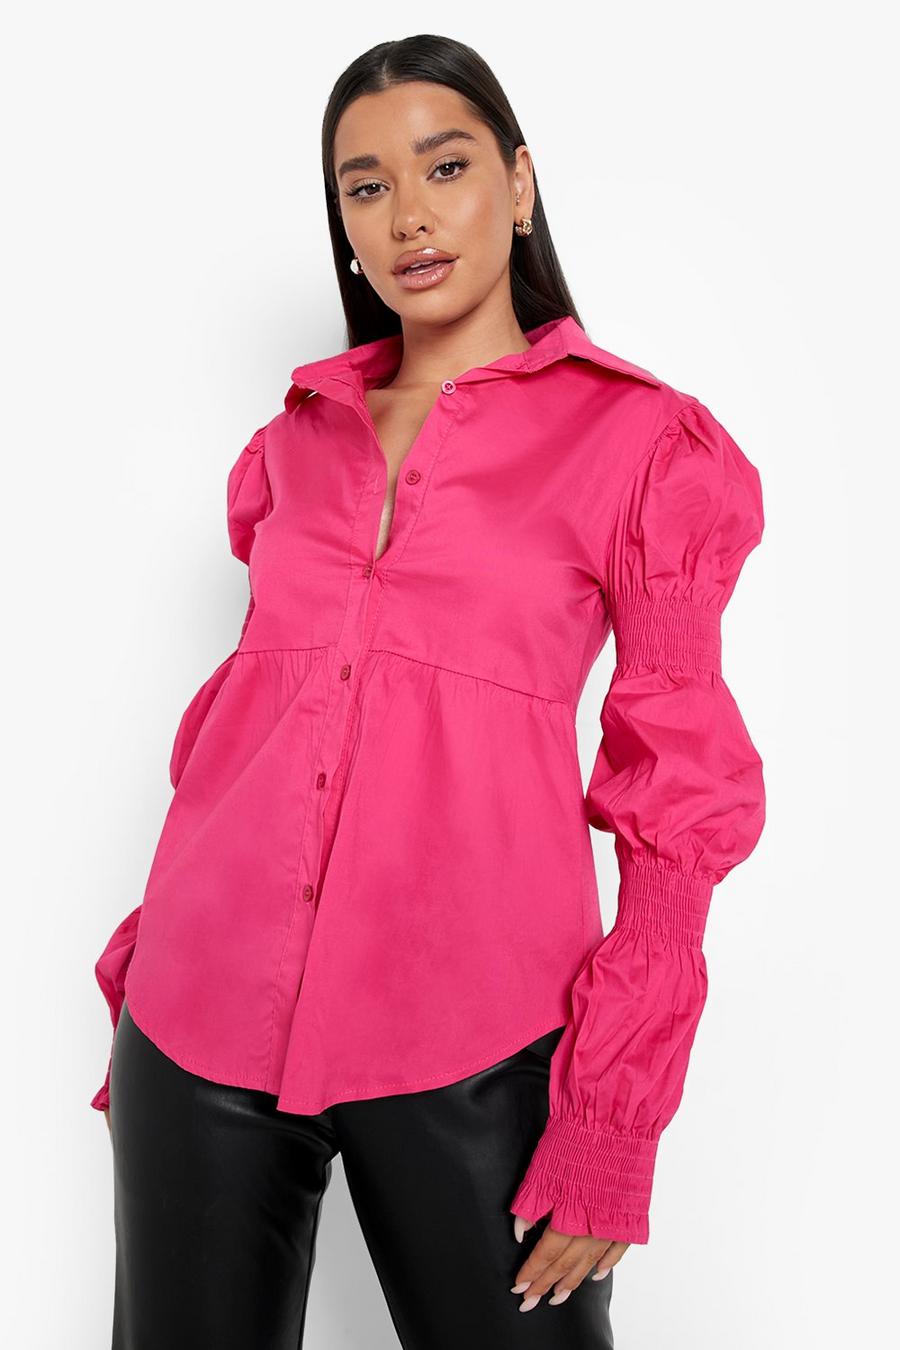 Bright pink Cotton Ruched Sleeve Shirt